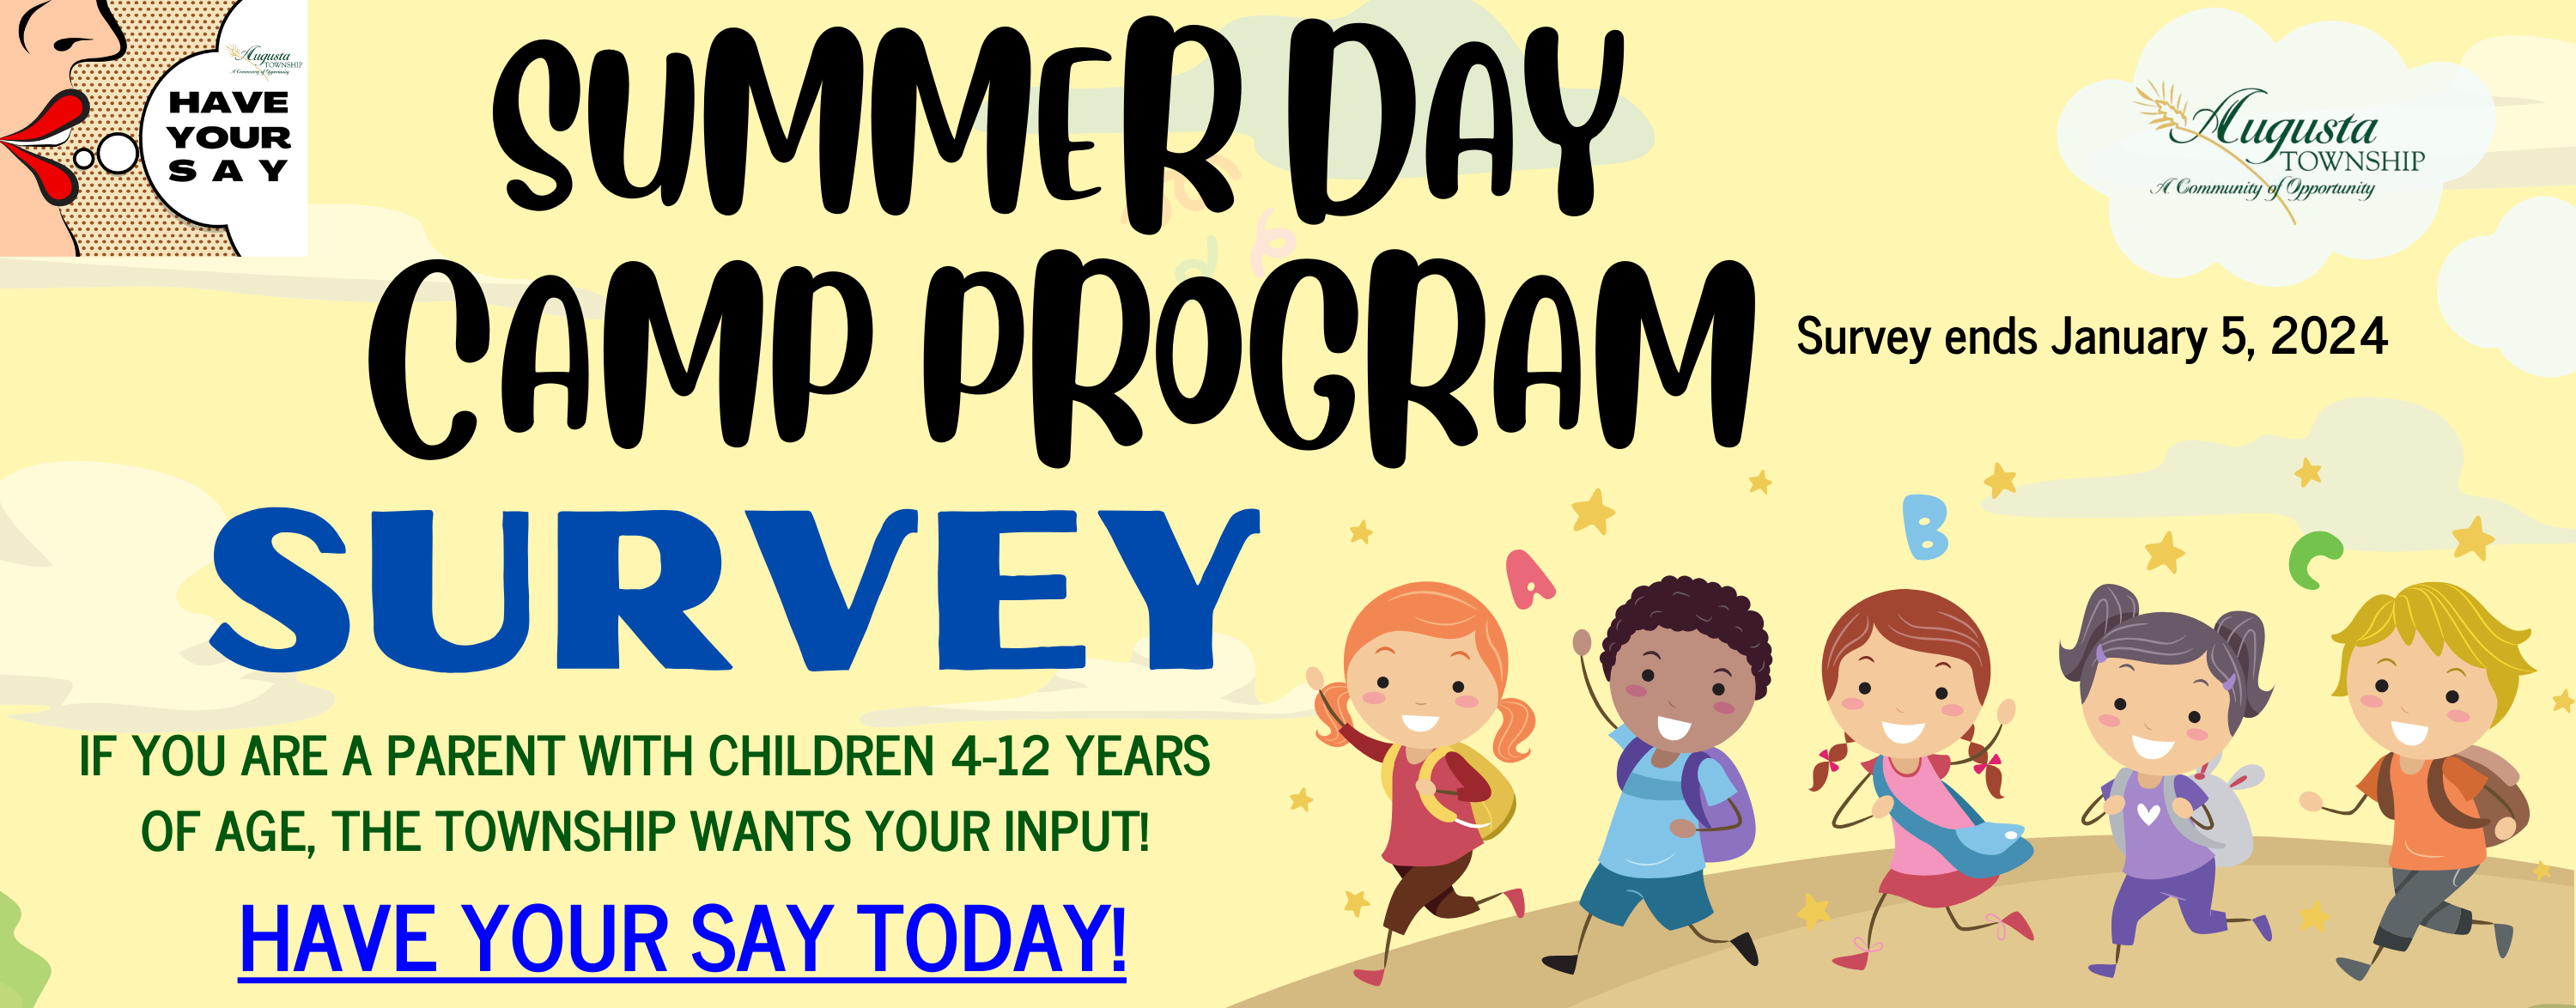 summer day camp survey poster